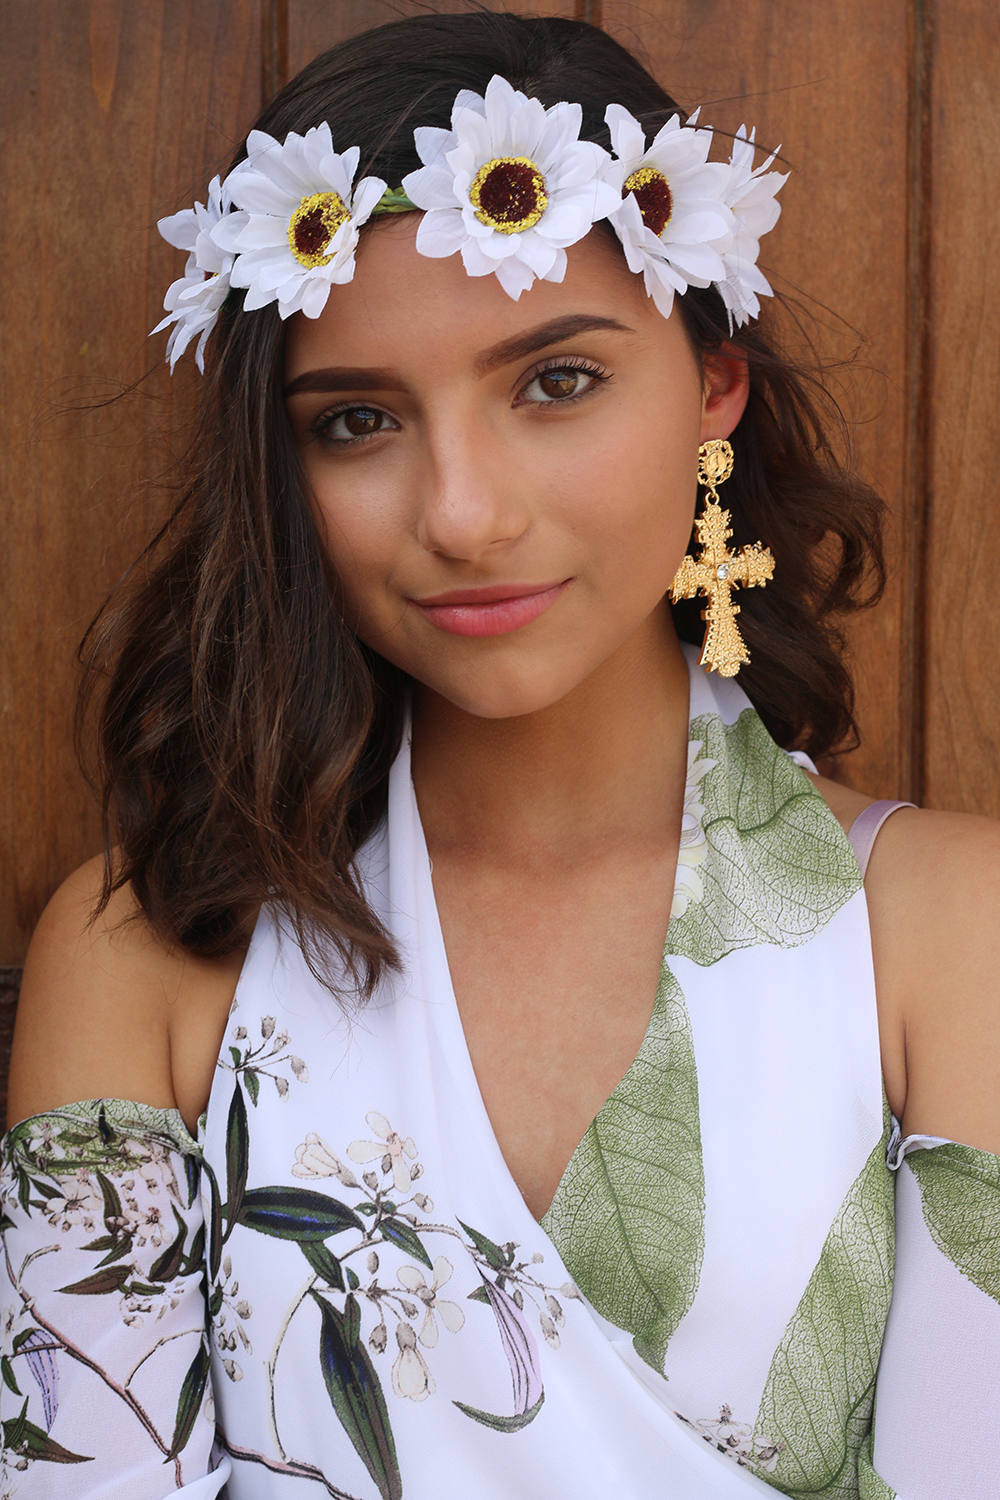 Halloween Costumes With Flower Crowns
 White Flower Crown Headband Halloween Costume Day of the